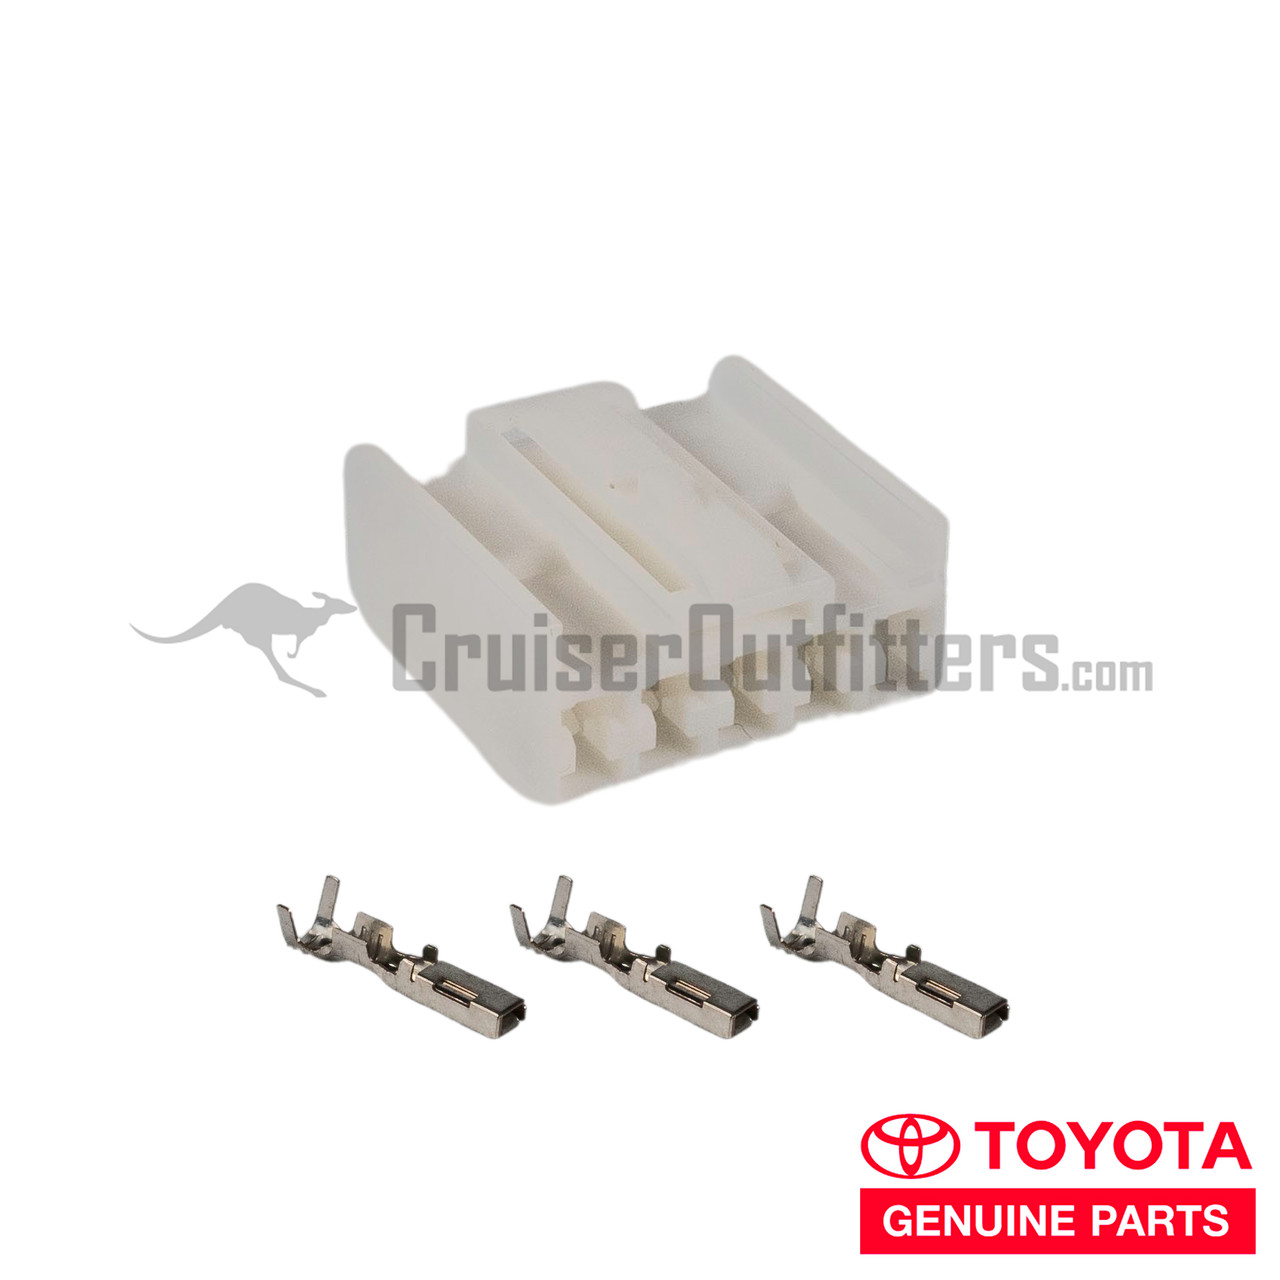 Connector And Terminal Kit - OEM Toyota - Fits Differential Locker Switch ELEC60020/ELEC84725 Applications